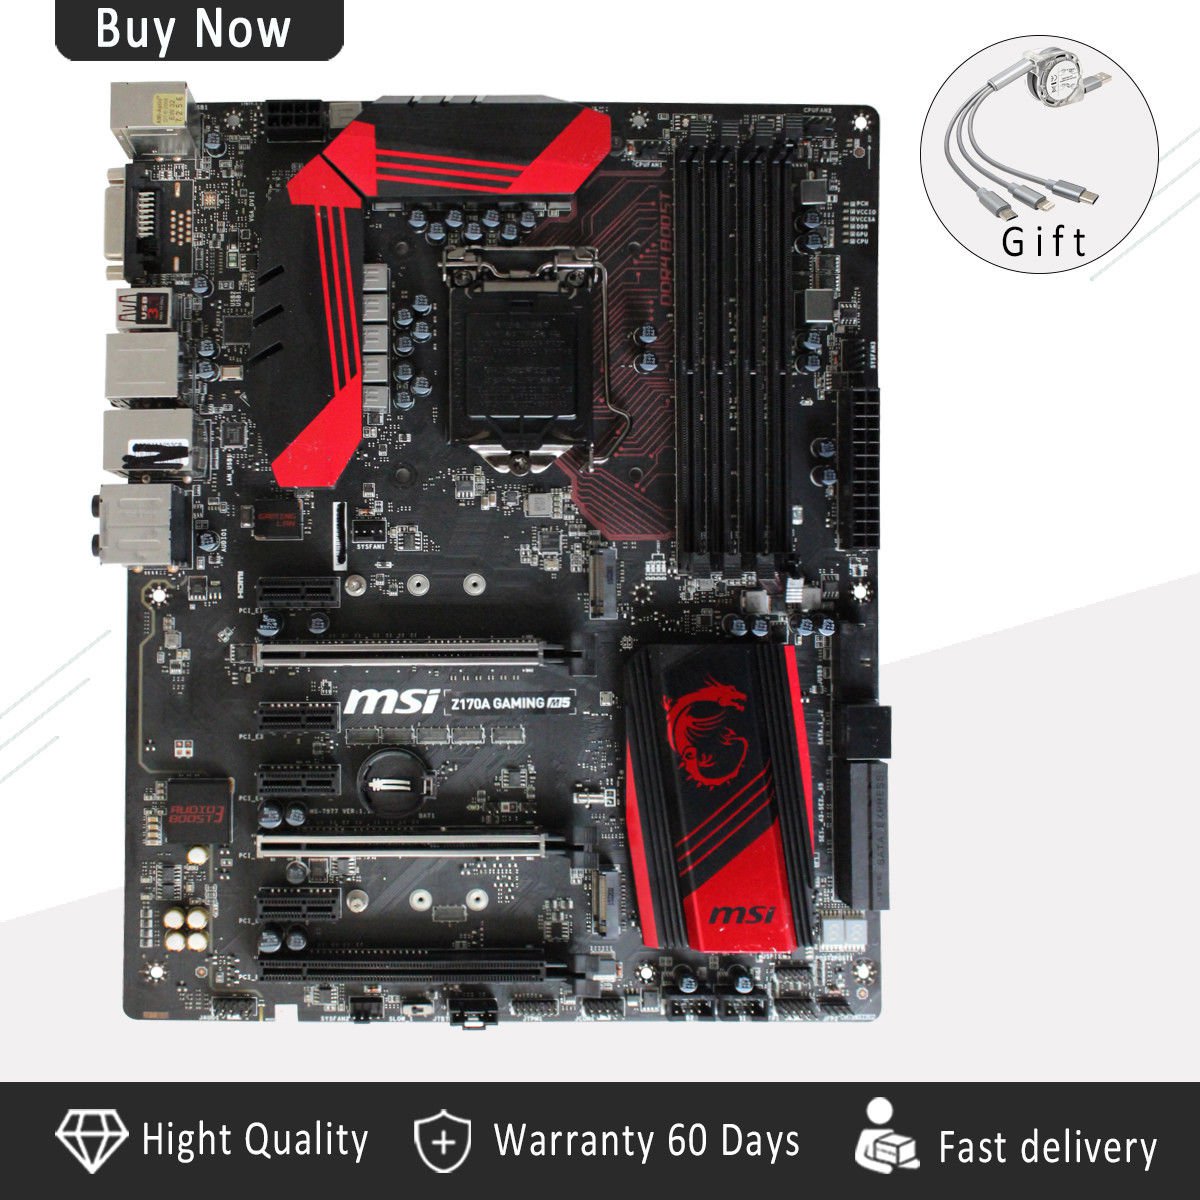 For MSI Z170A GAMING M5 Motherboard Intel Z170 LGA1151 DDR4 Mainboard withGift-c